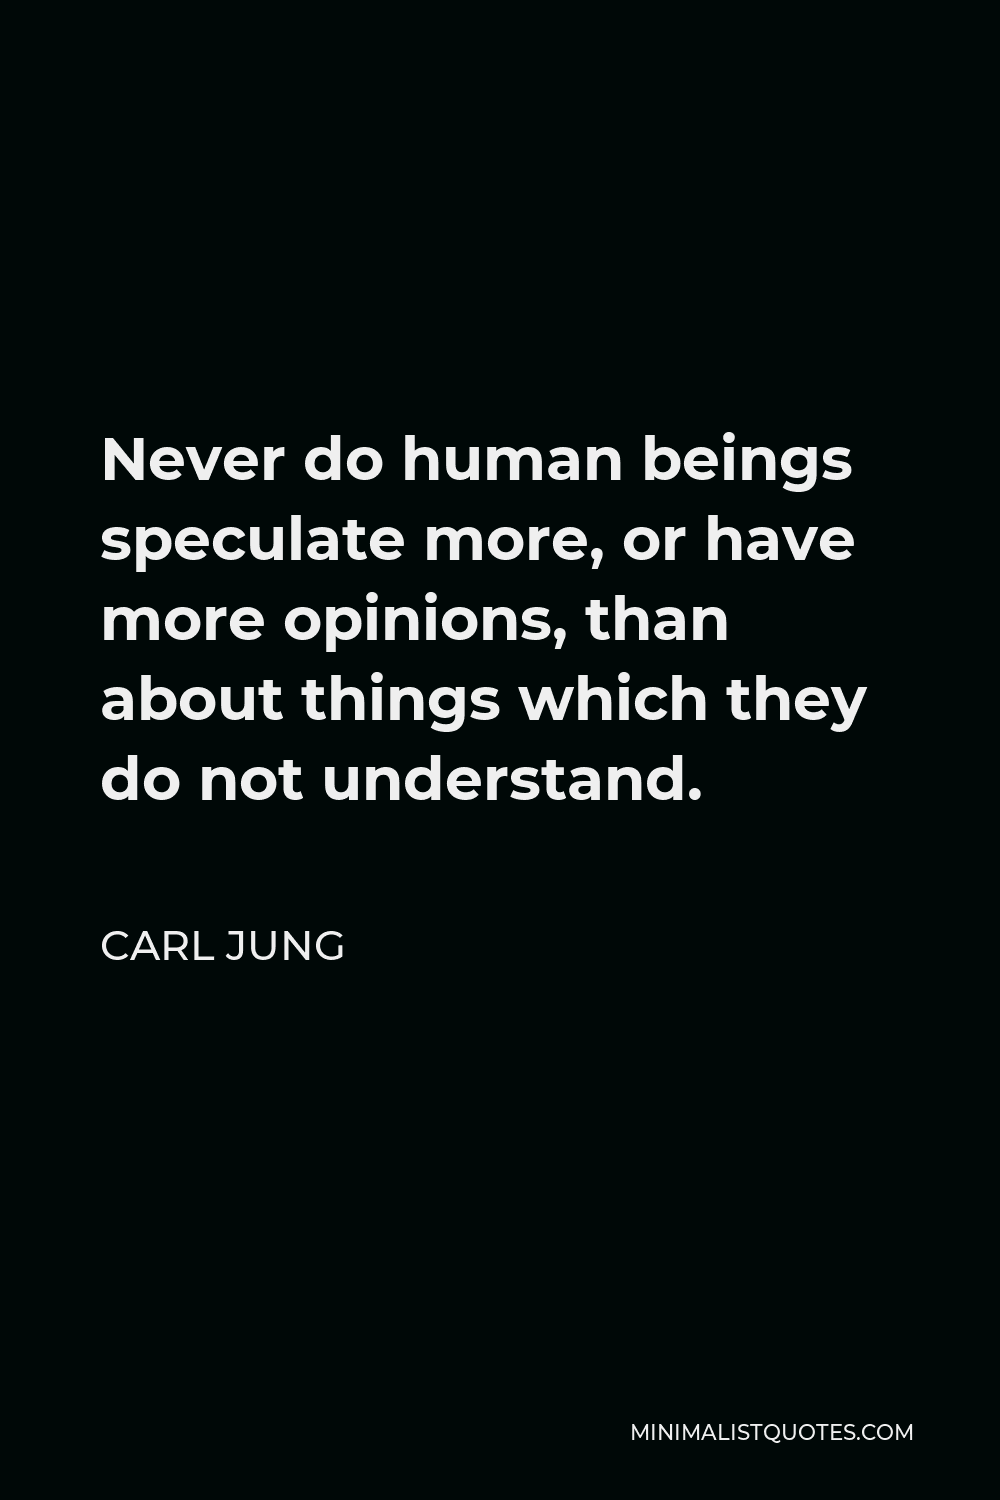 Carl Jung Quote - Never do human beings speculate more, or have more opinions, than about things which they do not understand.